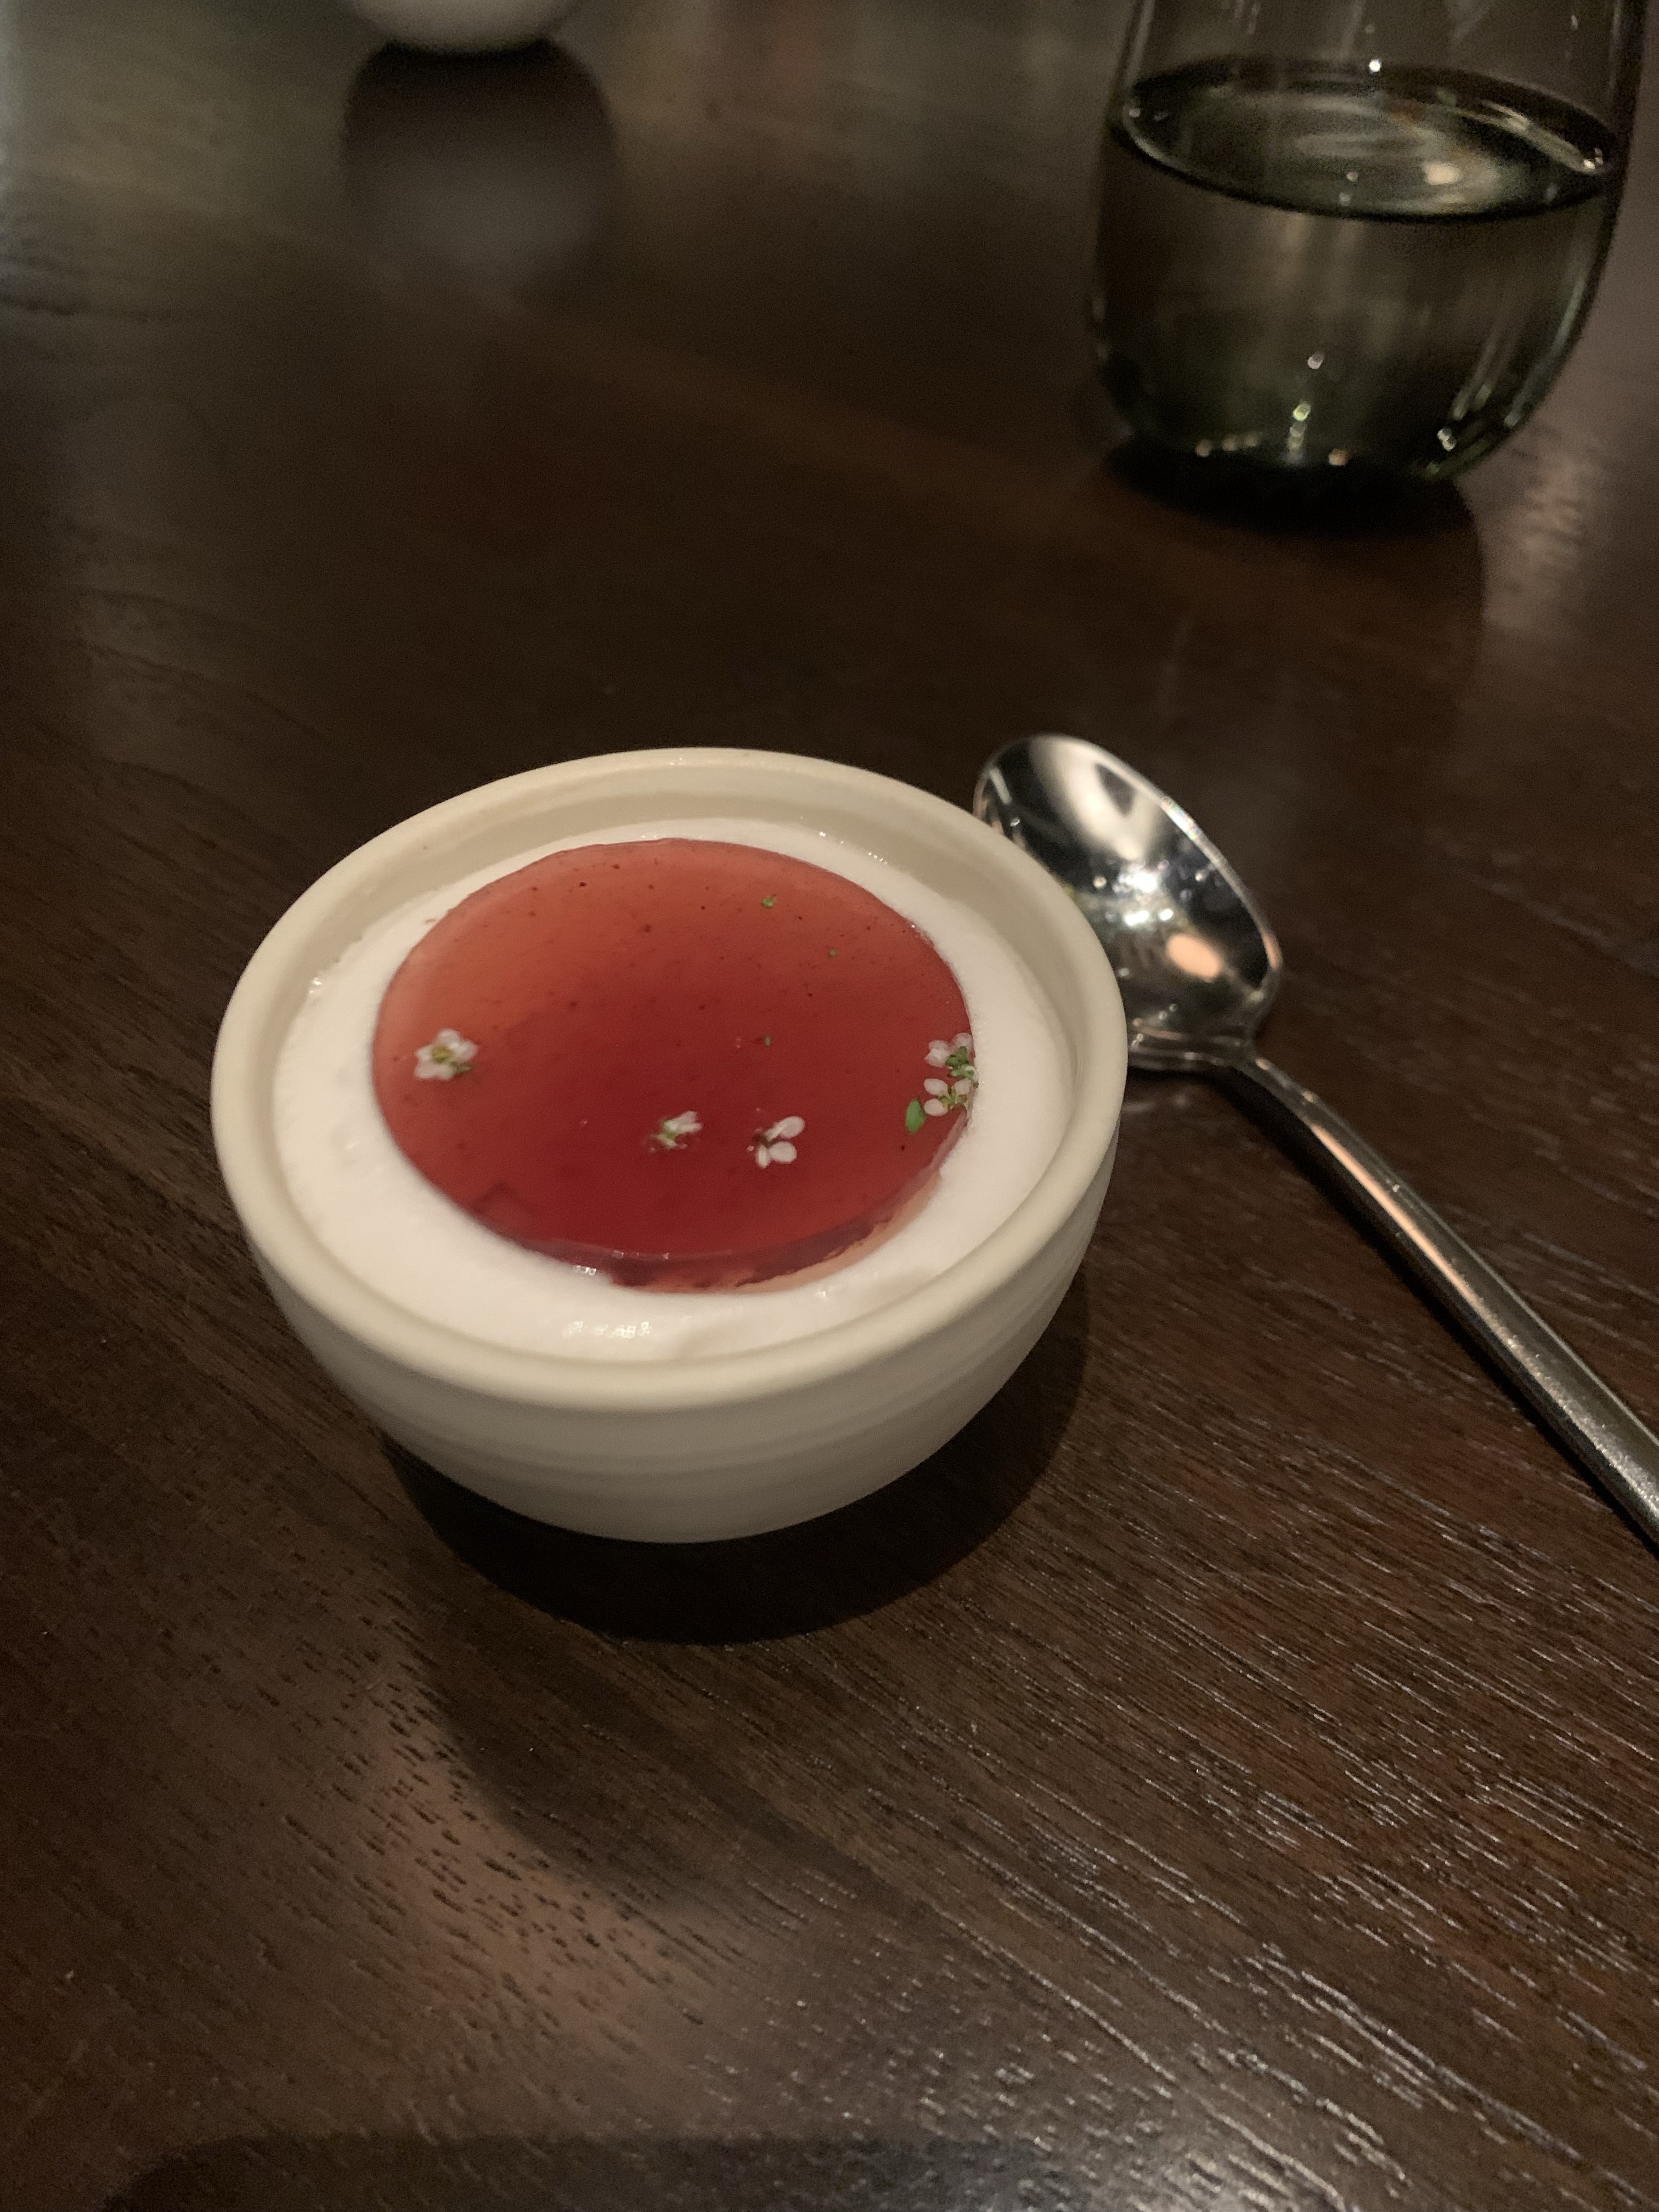 Disc of red jelly on top of white sorbet